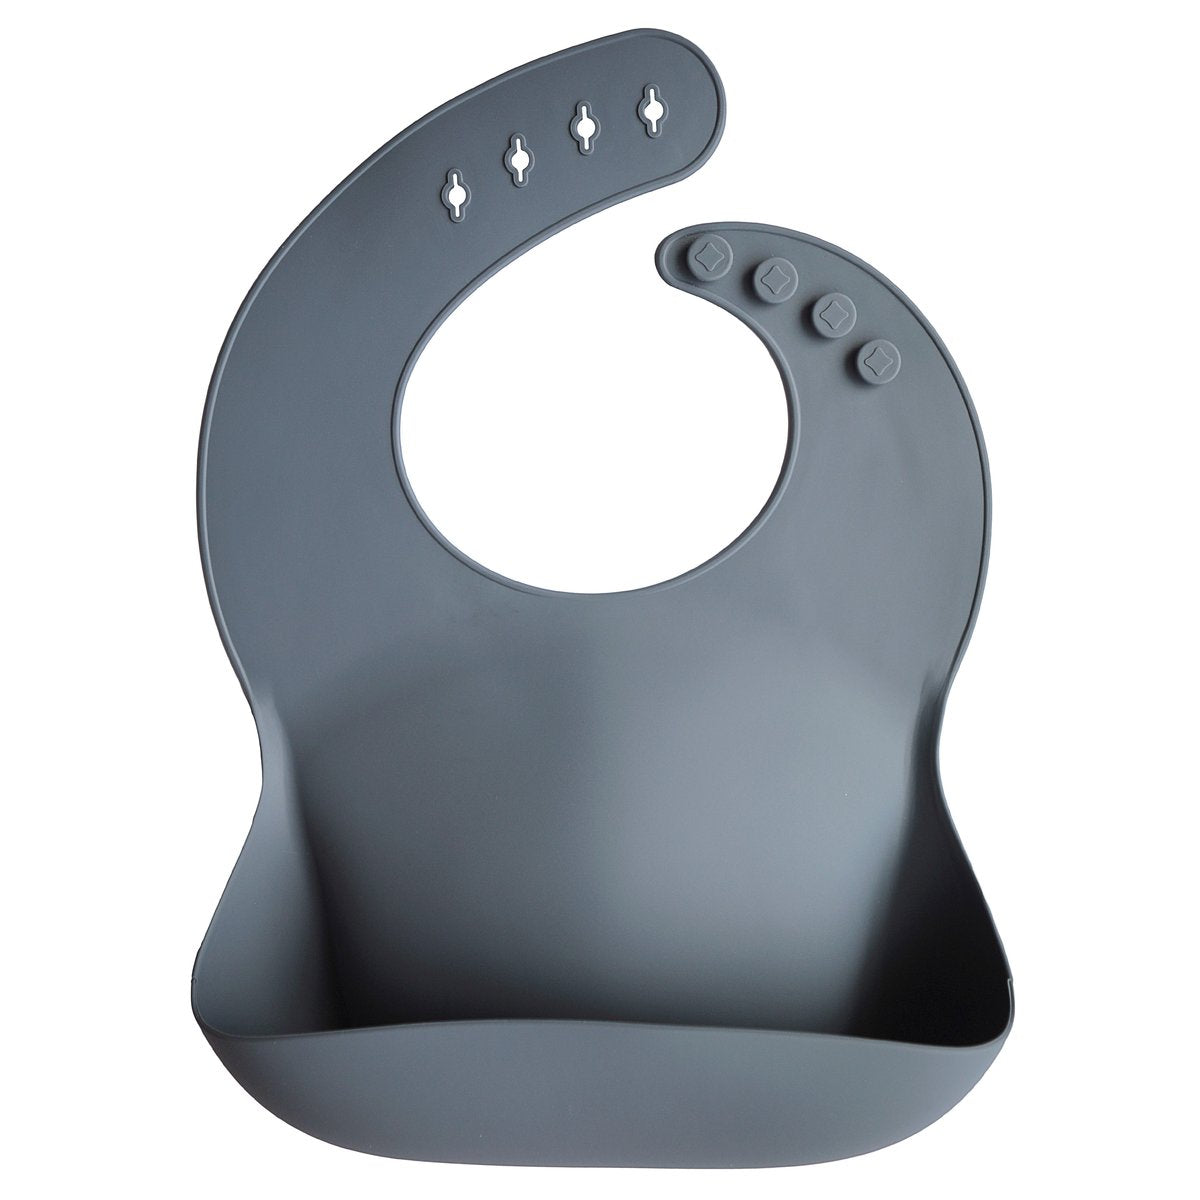 Silicone Baby Bib | Assorted Options